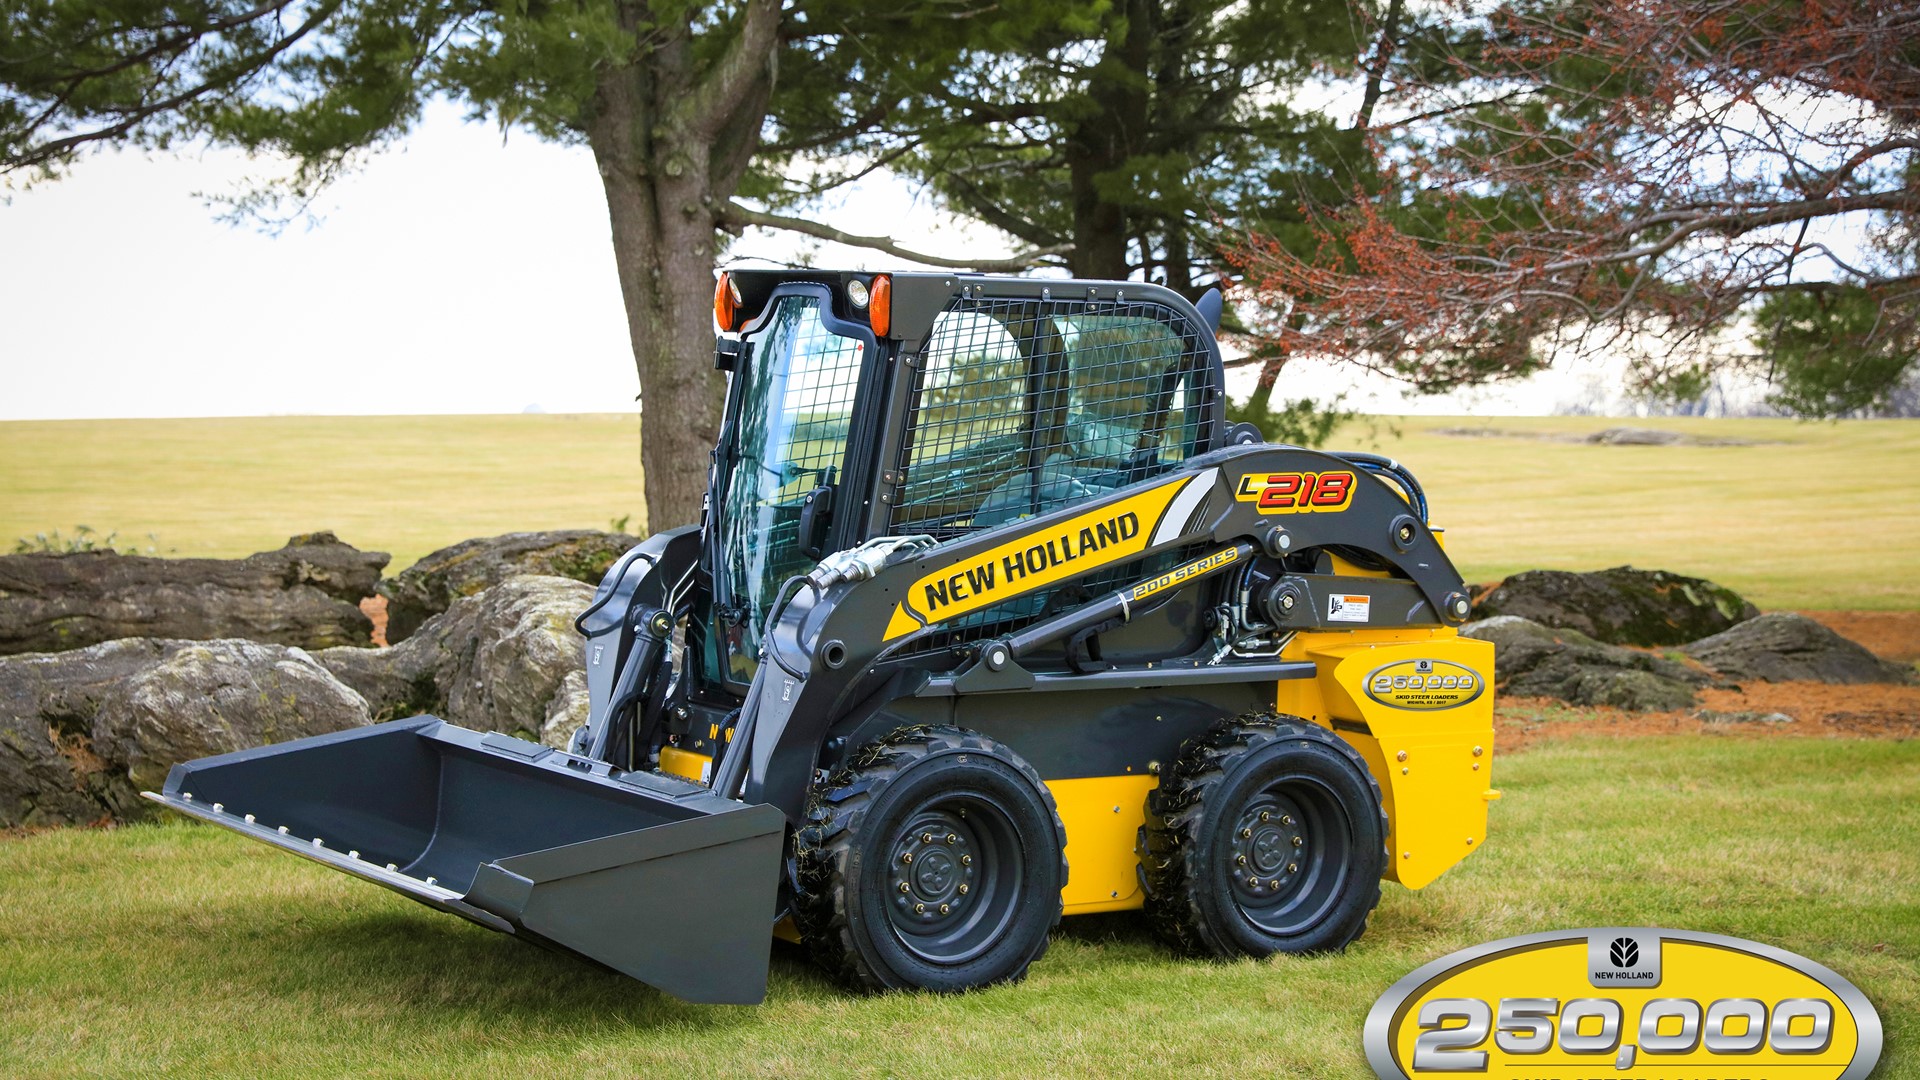 New Holland Construction Manufactures its 250,000th Skid Steer Loader